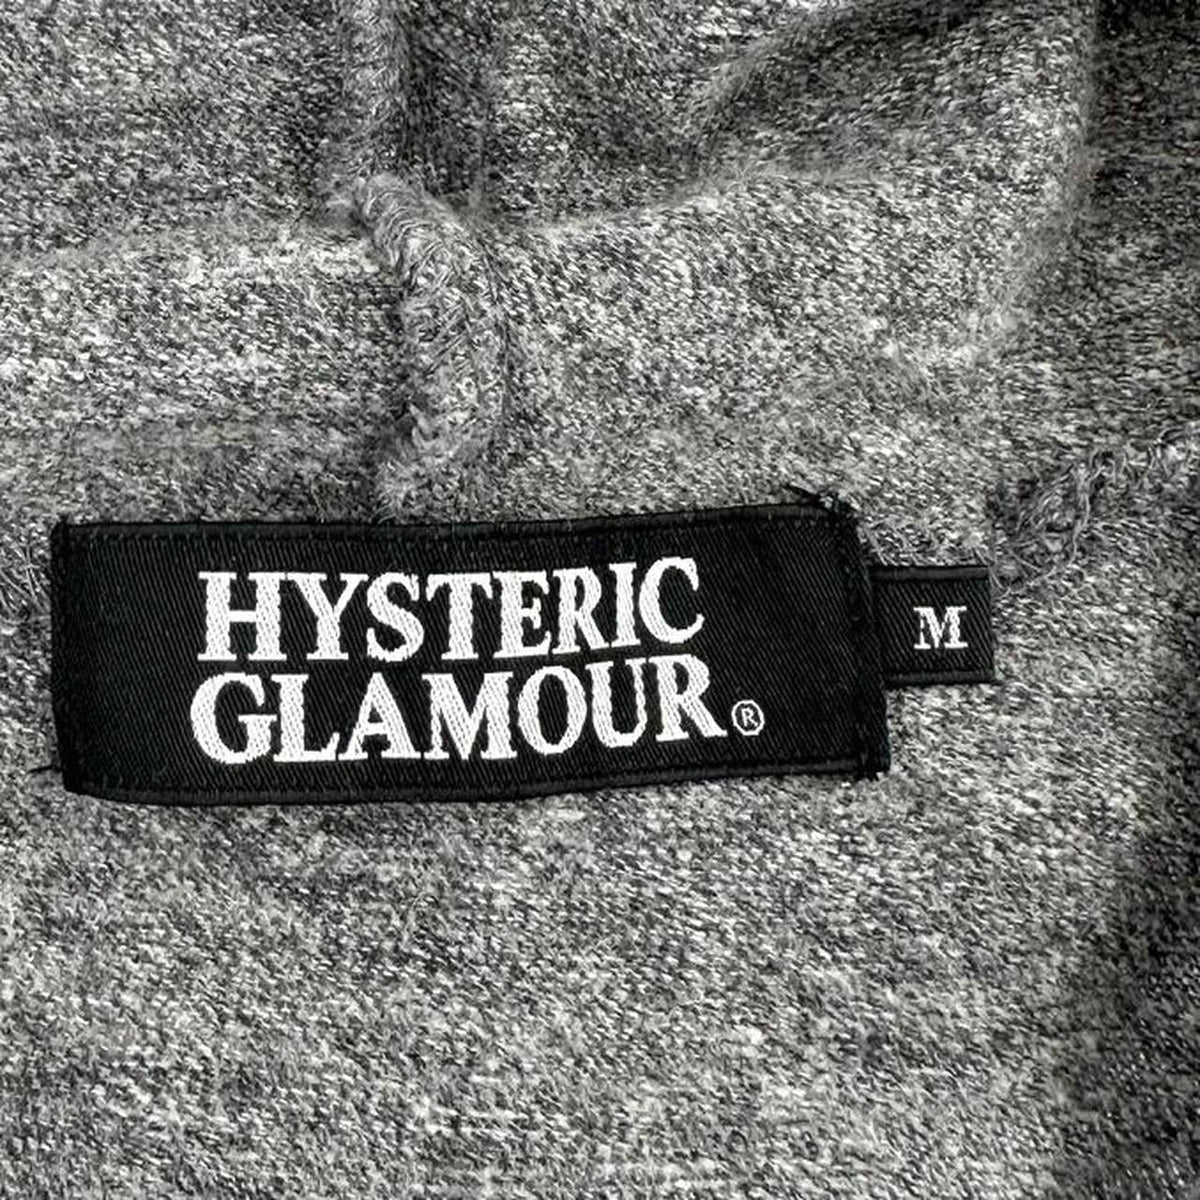 Hysteric Glamour hoodie woman’s size M